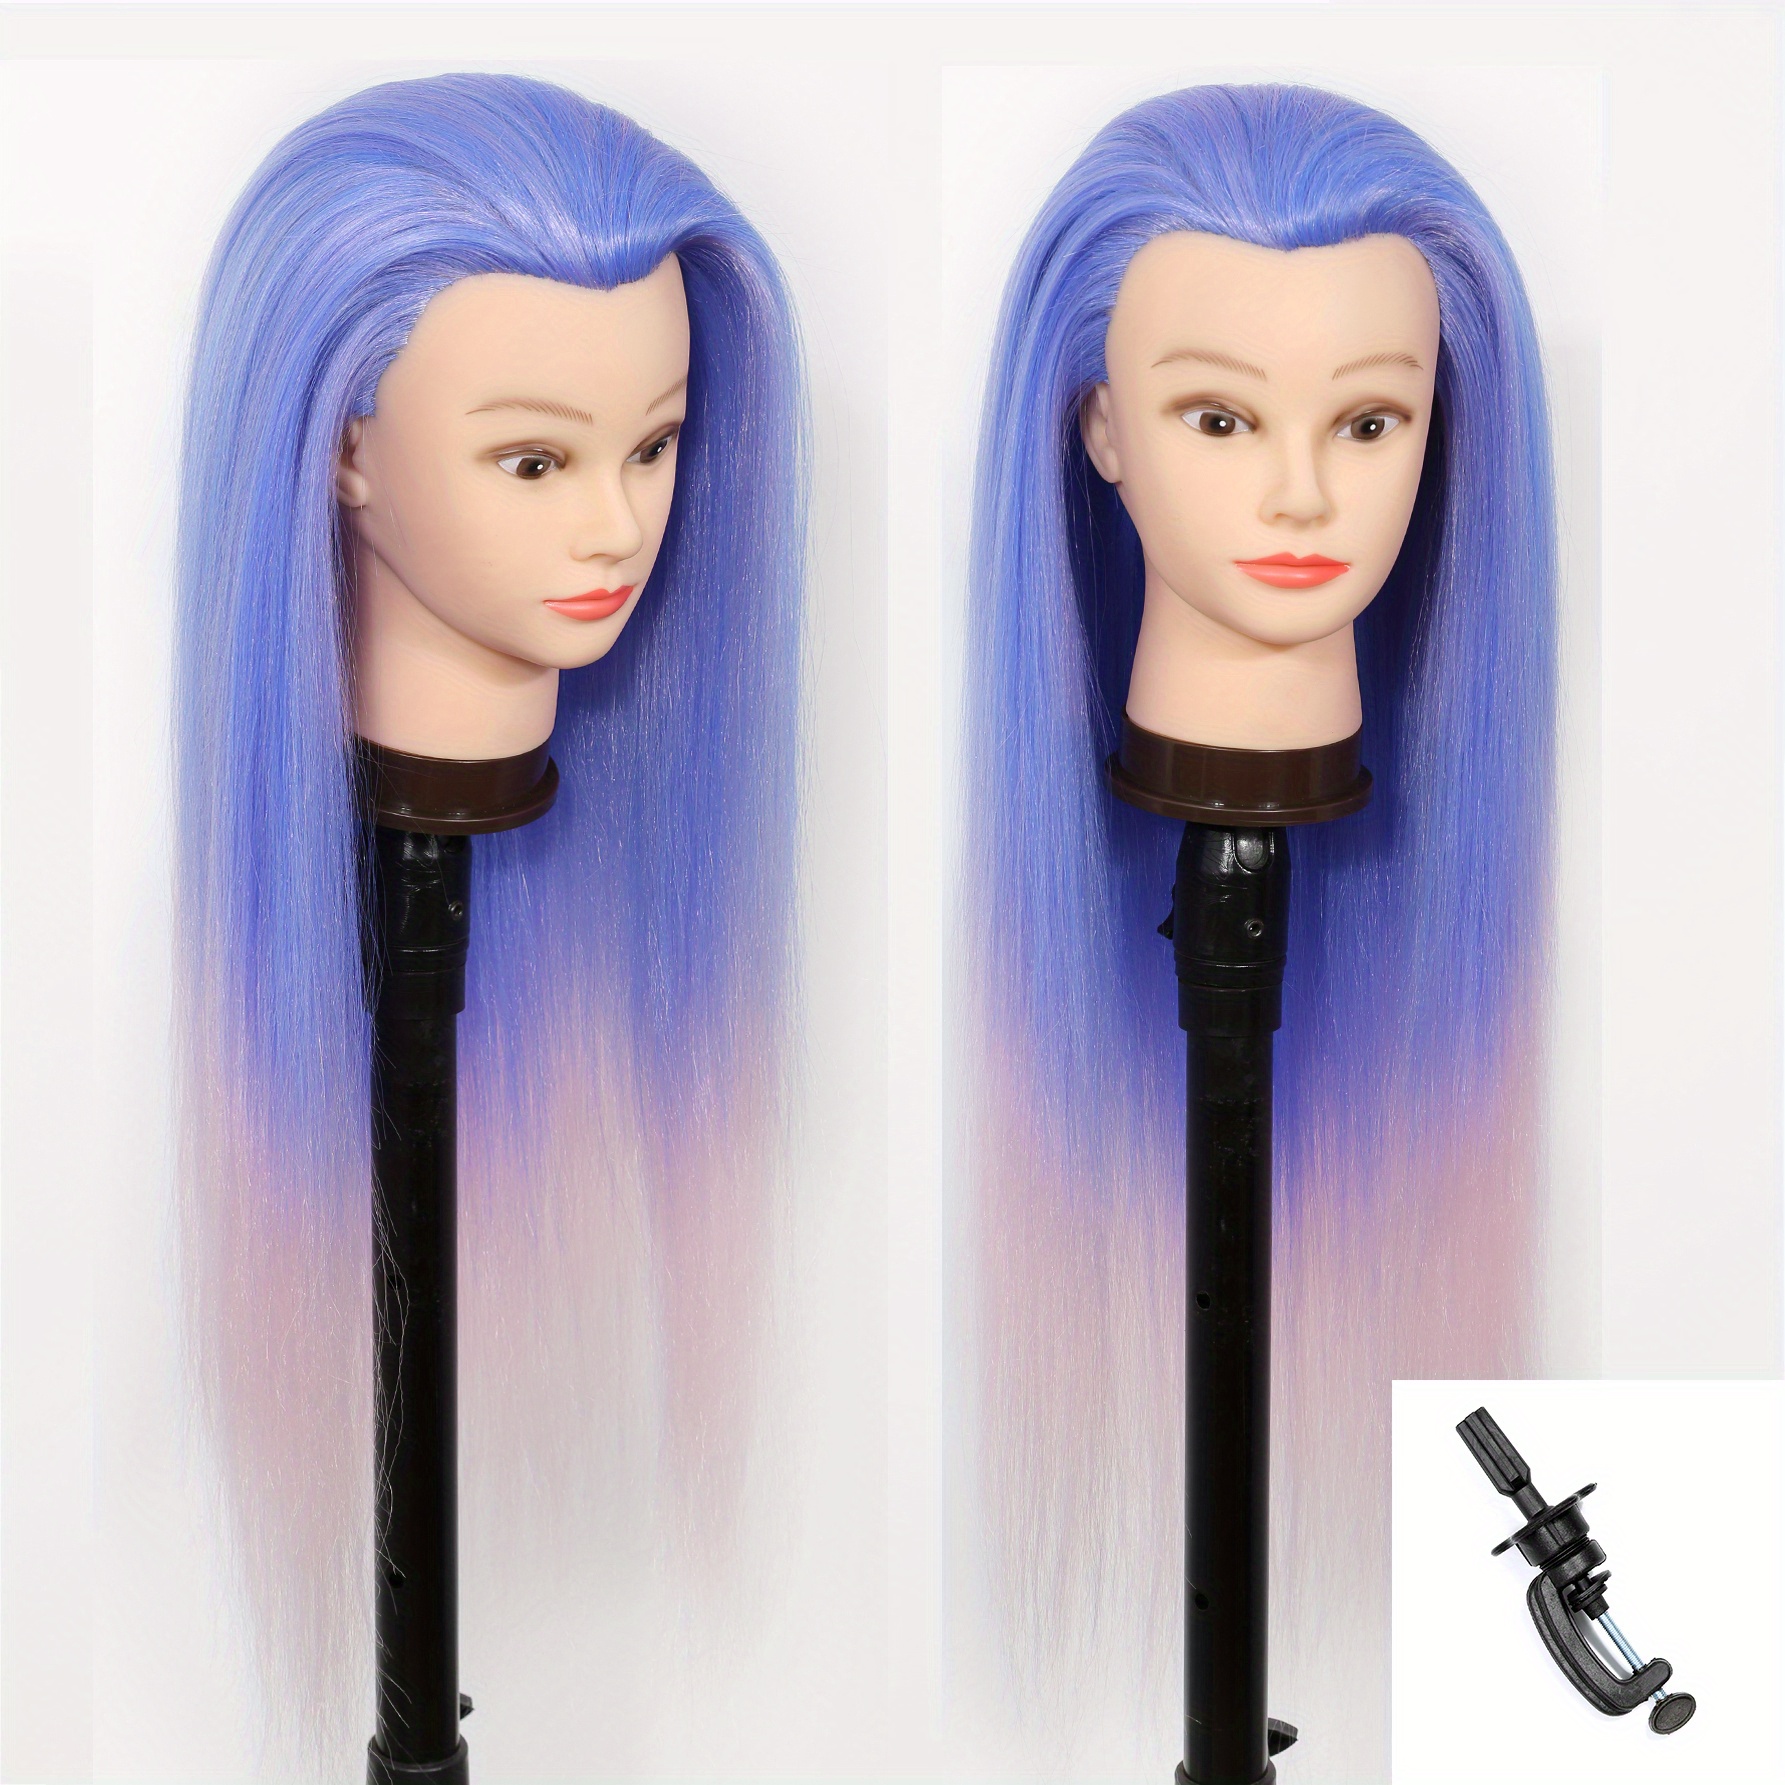 Wig Hairdresser Training Head Clamp Stand - The Wig Outlet